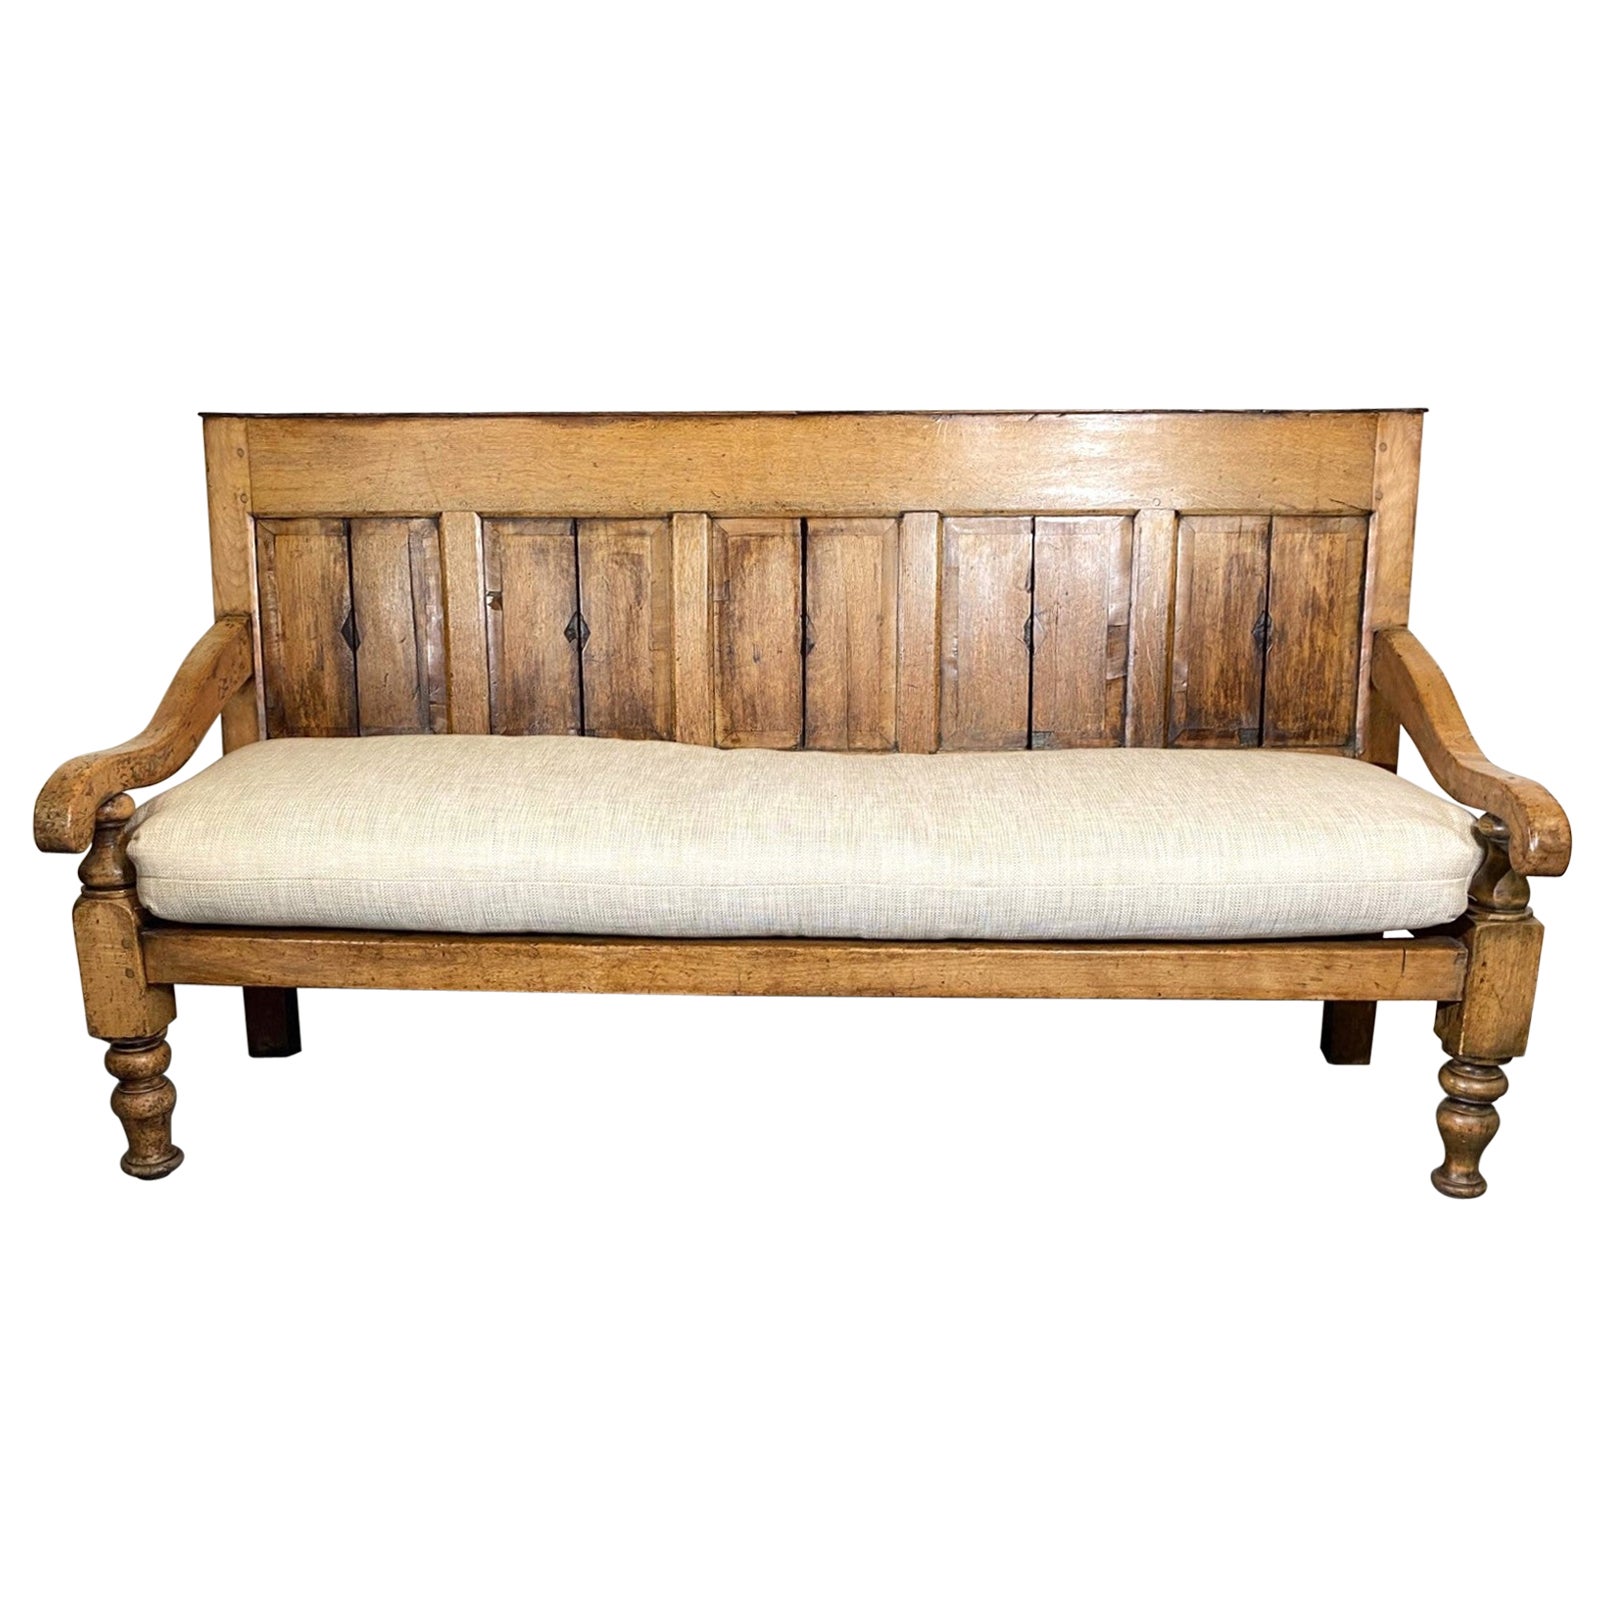 1840 English Bench For Sale